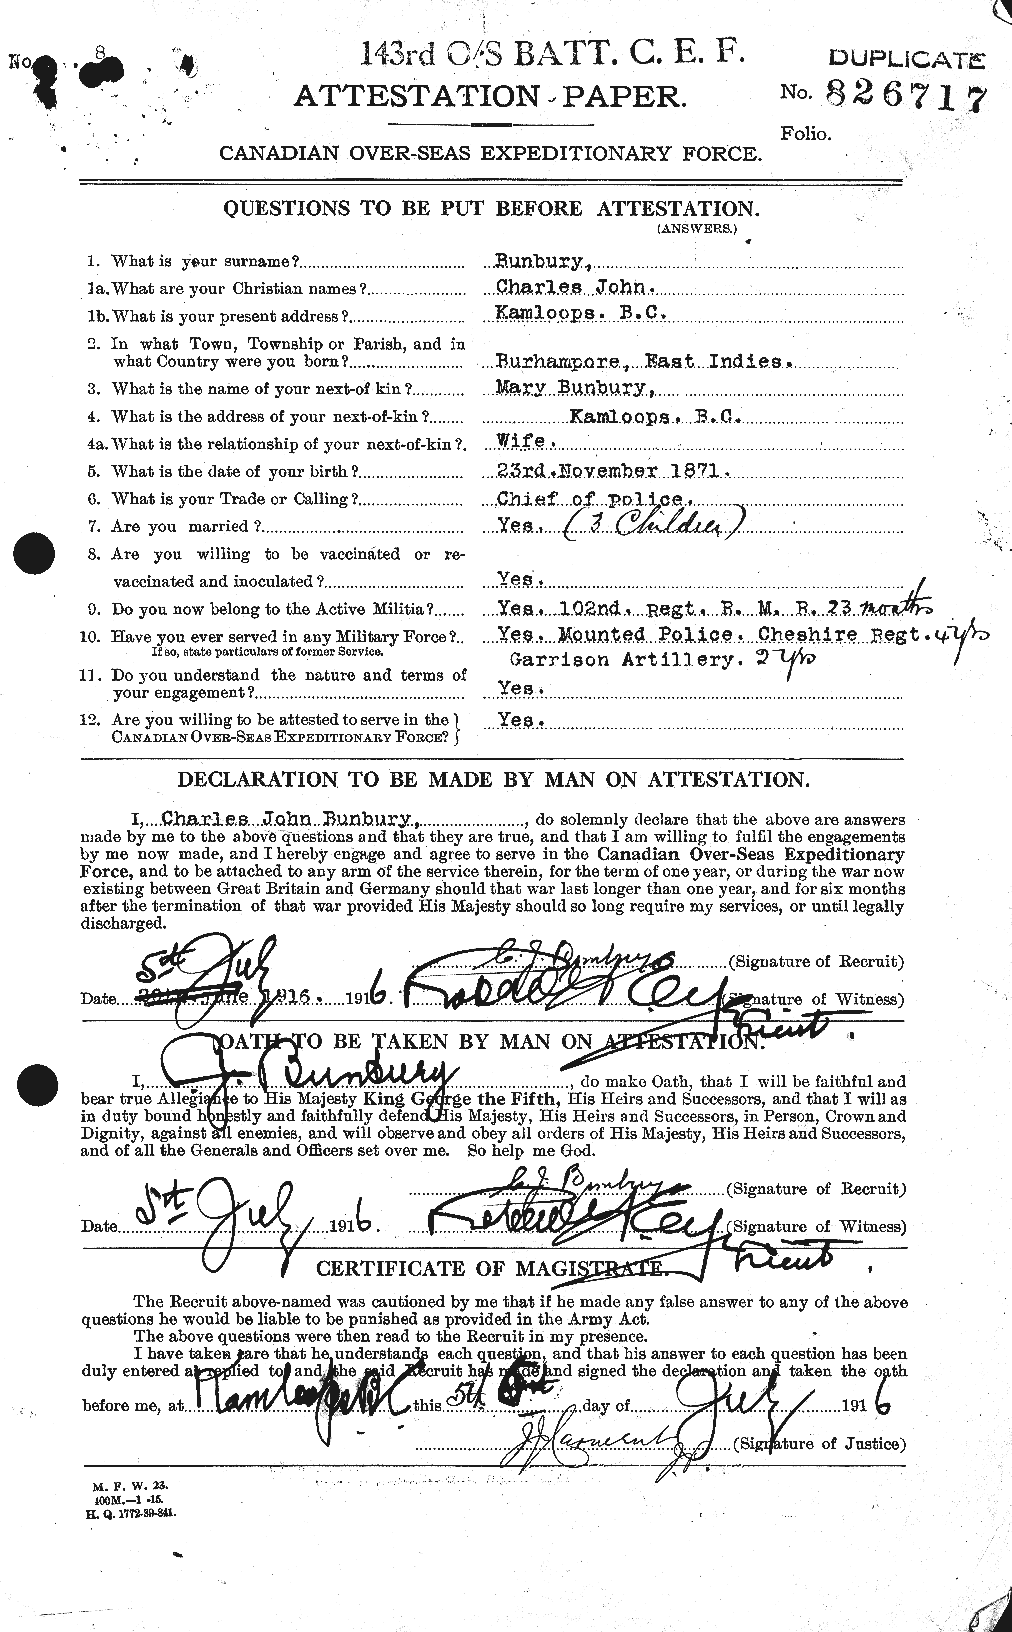 Personnel Records of the First World War - CEF 269884a